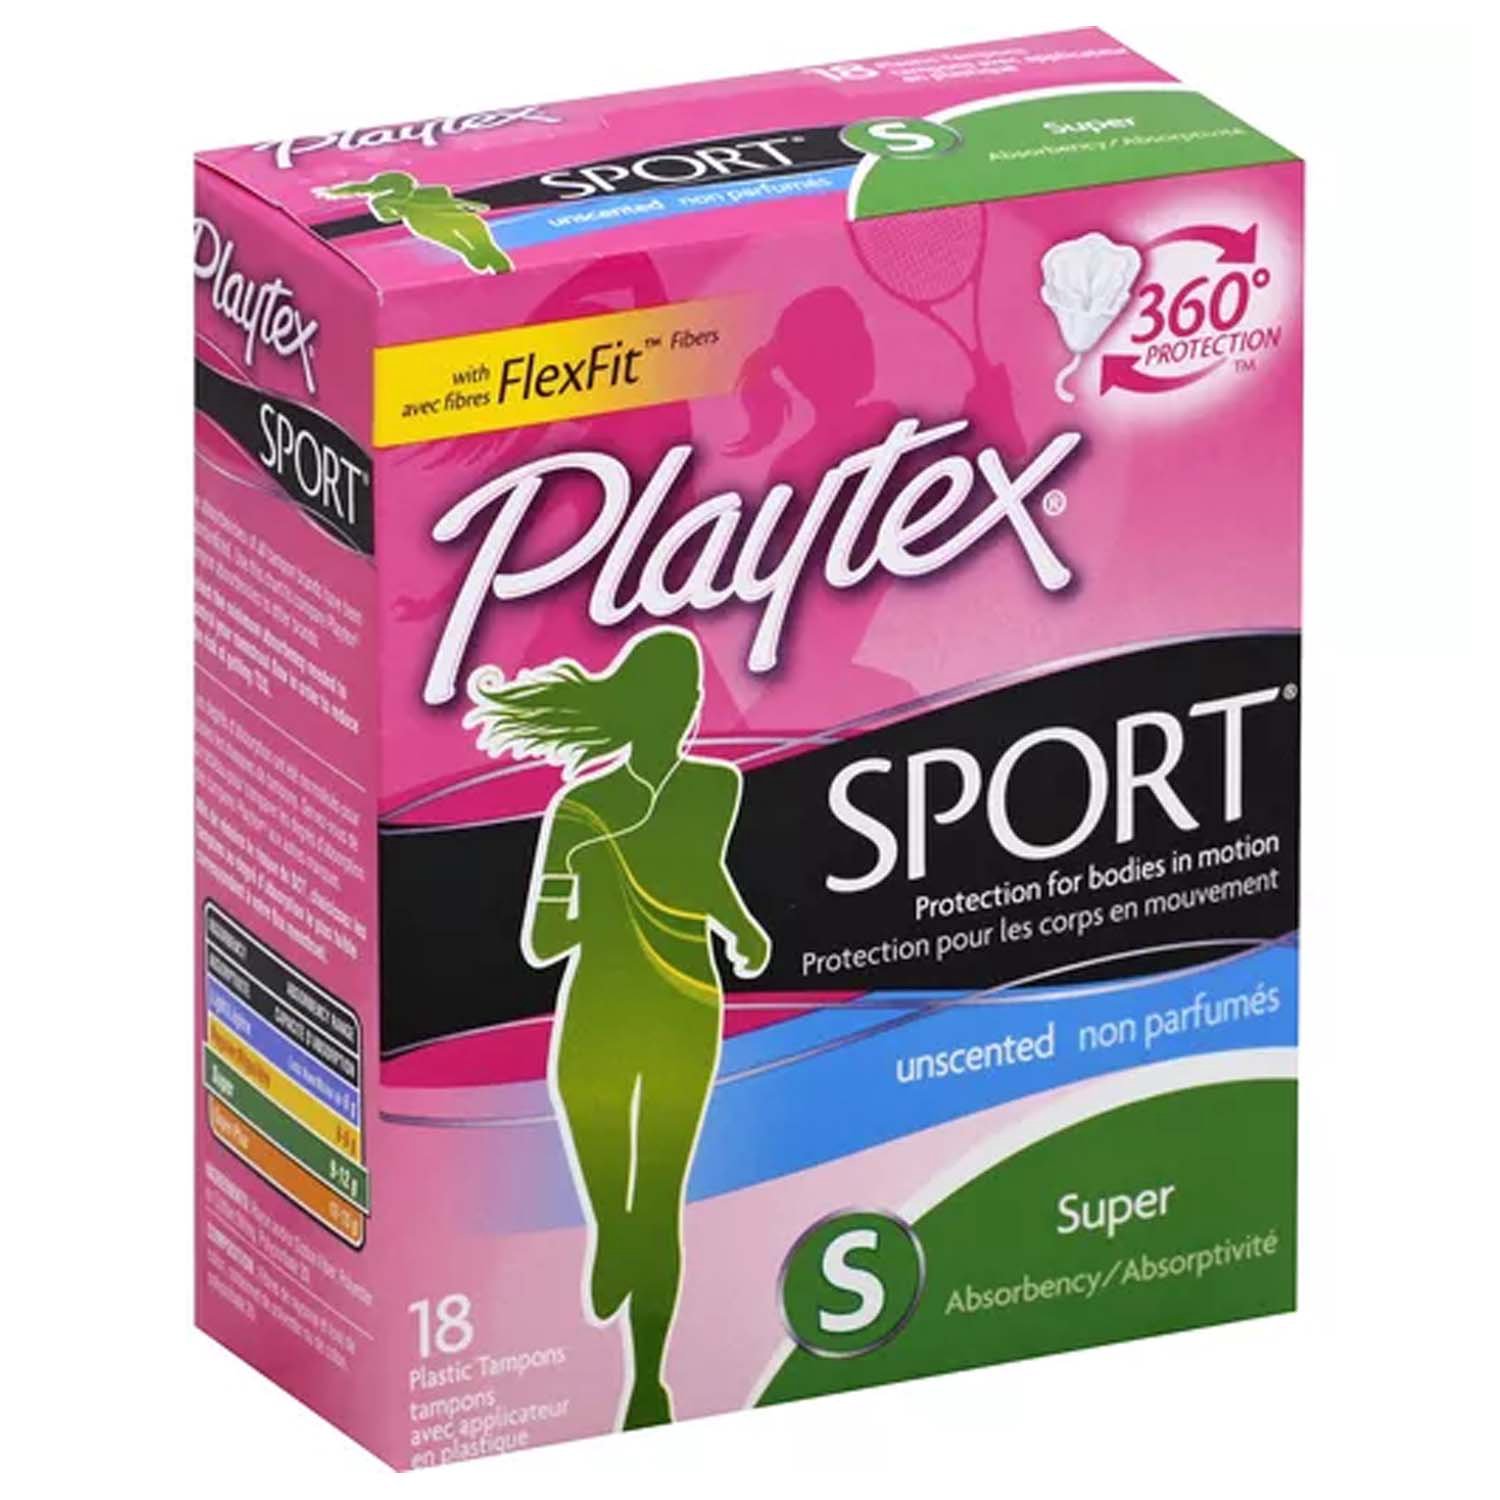 Playtex - Playtex, Sport Fresh Balance - Tampons, Plastic, Super  Absorbency, Lightly Scented (16 count), Shop